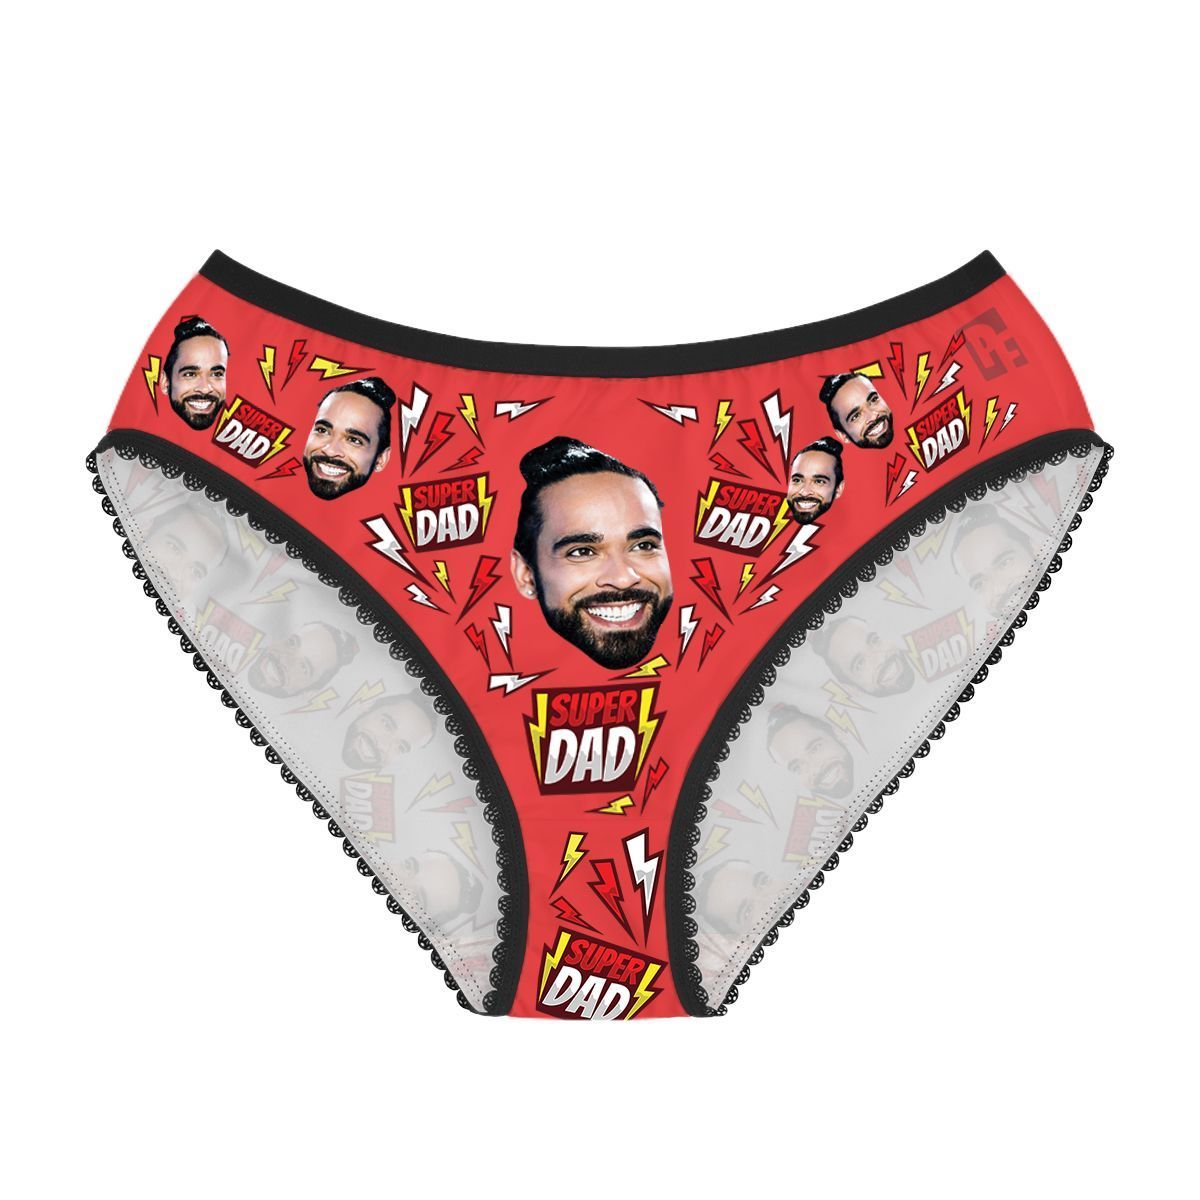 Red Super dad women's underwear briefs personalized with photo printed on them